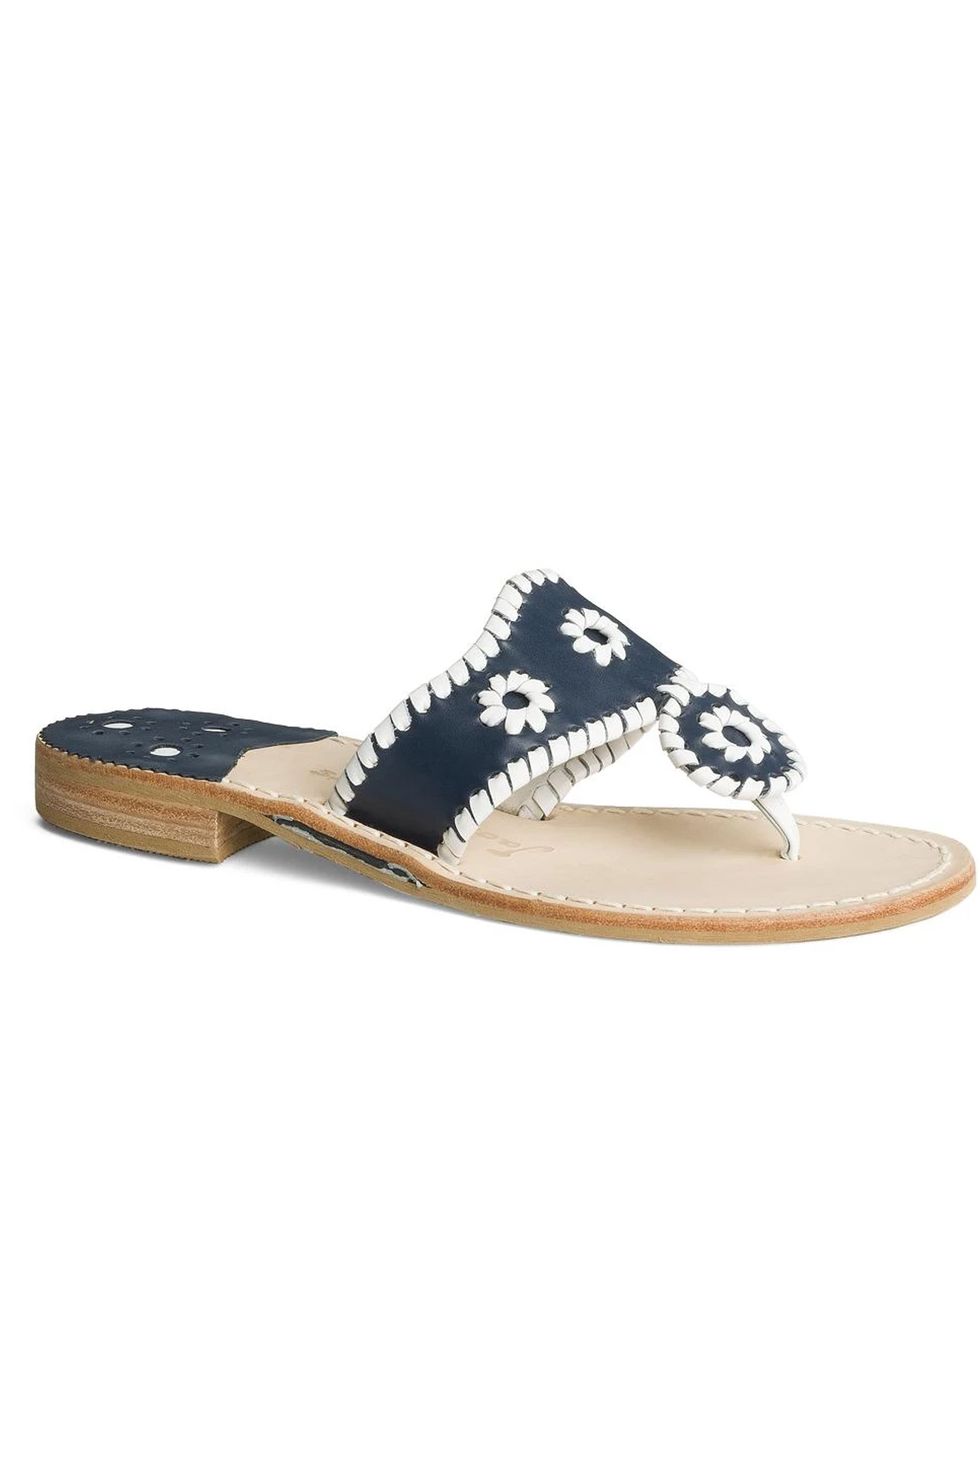 Shop Jack Rogers Sandals for 70% Off During the Private Sale